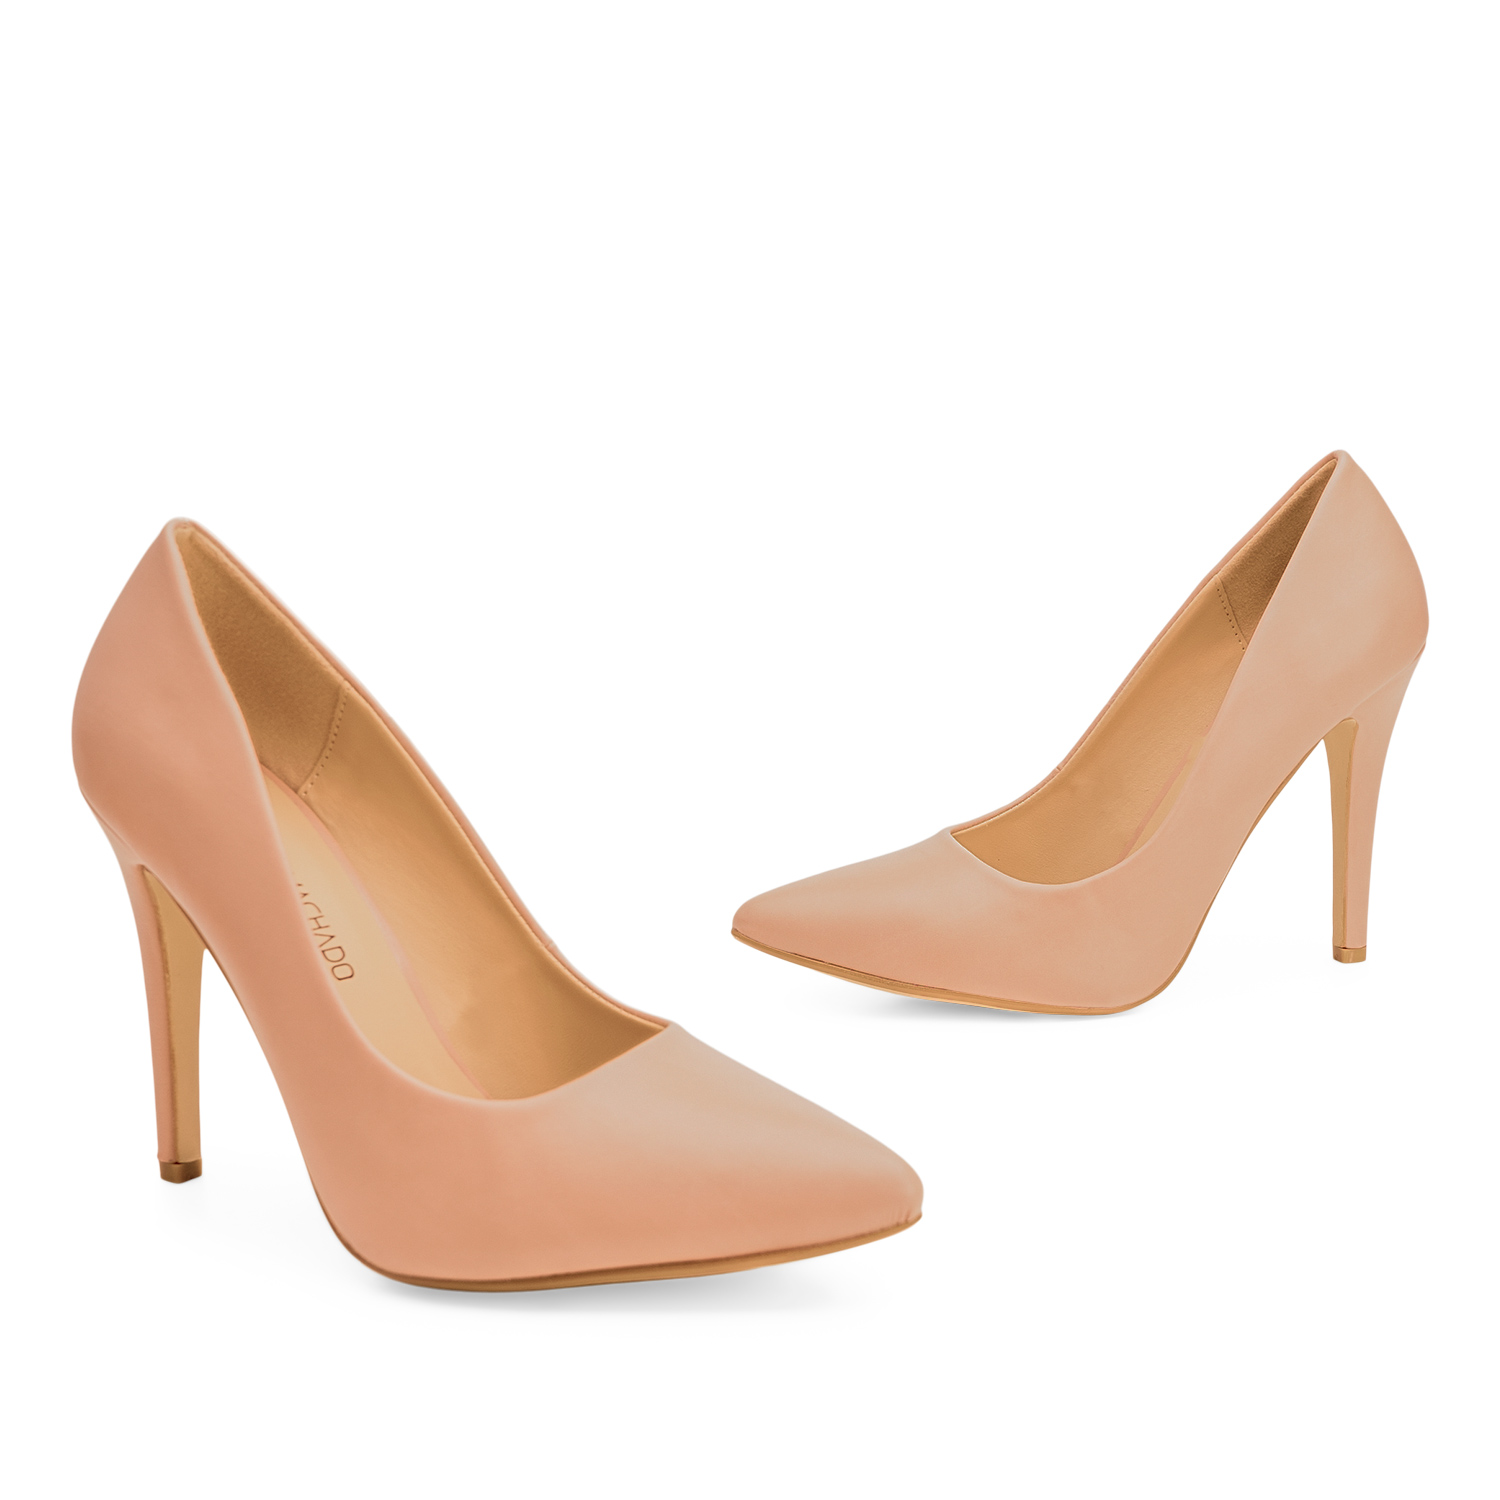 Heeled shoes in nude faux leather 